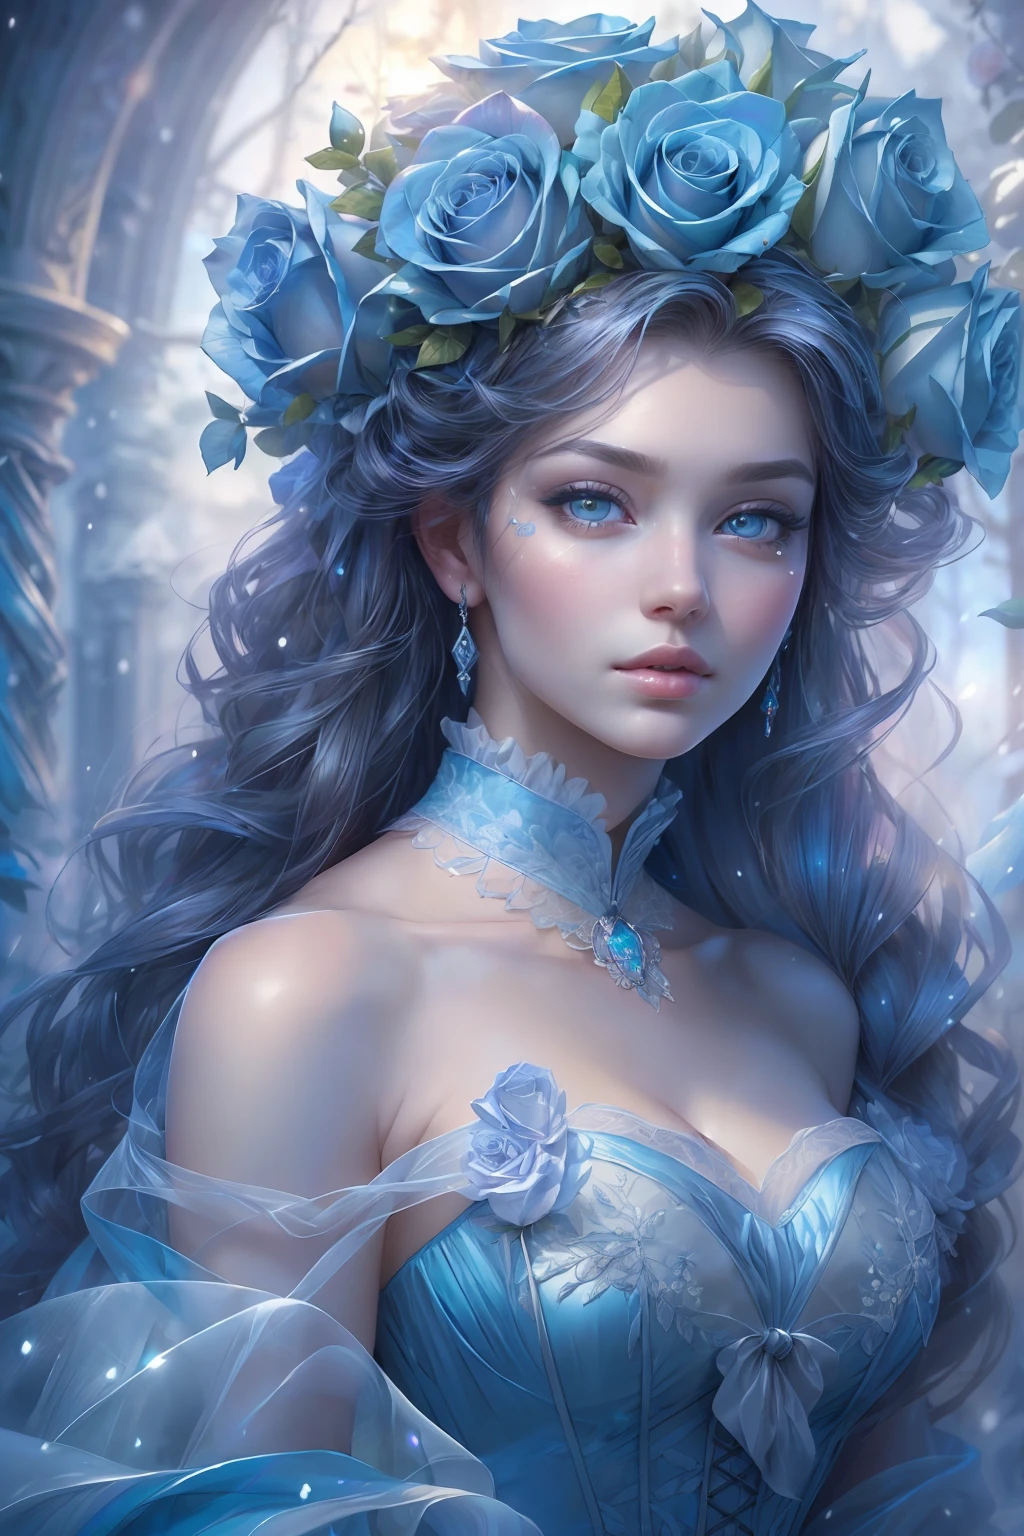 This is realistic (((fantasy))) artwork set in the frozen blue rose garden of an enchanted ice castle in winter and should consist of many shades of cold blue colors. It is snowing heavily. Generate a proud woman with a (((highly detailed face))) dressed in the billowing folds of a stunning French silk ballgown. The woman's elegant face is ((((highly detailed, with realistic features and soft, puffy lips.)))) The ballgown is embellished with ruffles, sashes, and bows and a delicately, but intricately, hand-embroidered bodice. The corset features silk ribbon. She is wearing Victorian royal winter outer clothes. The woman's stunning eyes are beautifully detailed, featuring realistic shading and multiple colors, and in high resolution. The woman is in a garden of eternal roses, each one beautifully formed and highly detailed. These realistic blue roses feature shimmering shades of light blue, dark blue, silver, and glimmering blue-purple. The eternal rose is a deep shade of periwinkle with shimmering iridescent overtones and undertones. Ensure that the woman's face, hair, and eyes are perfect. realism, high fantasy, whimsical fantasy, storybook fantasy, fairytale fantasy, fantasy details, enchanting, bewitching, 8k, hires, CGI, digital painting, unity, unreal engine, (((masterpiece))), intricate, elegant, highly detailed, majestic, digital photography, art by artgerm and ruan jia and Greg Rutkowski, (masterpiece, finely detailed beautiful eyes: 1.2), hdr, realistic skin texture, (((1woman))), (((solo))), Include a highly detailed face, extremely detailed face, and interesting background.